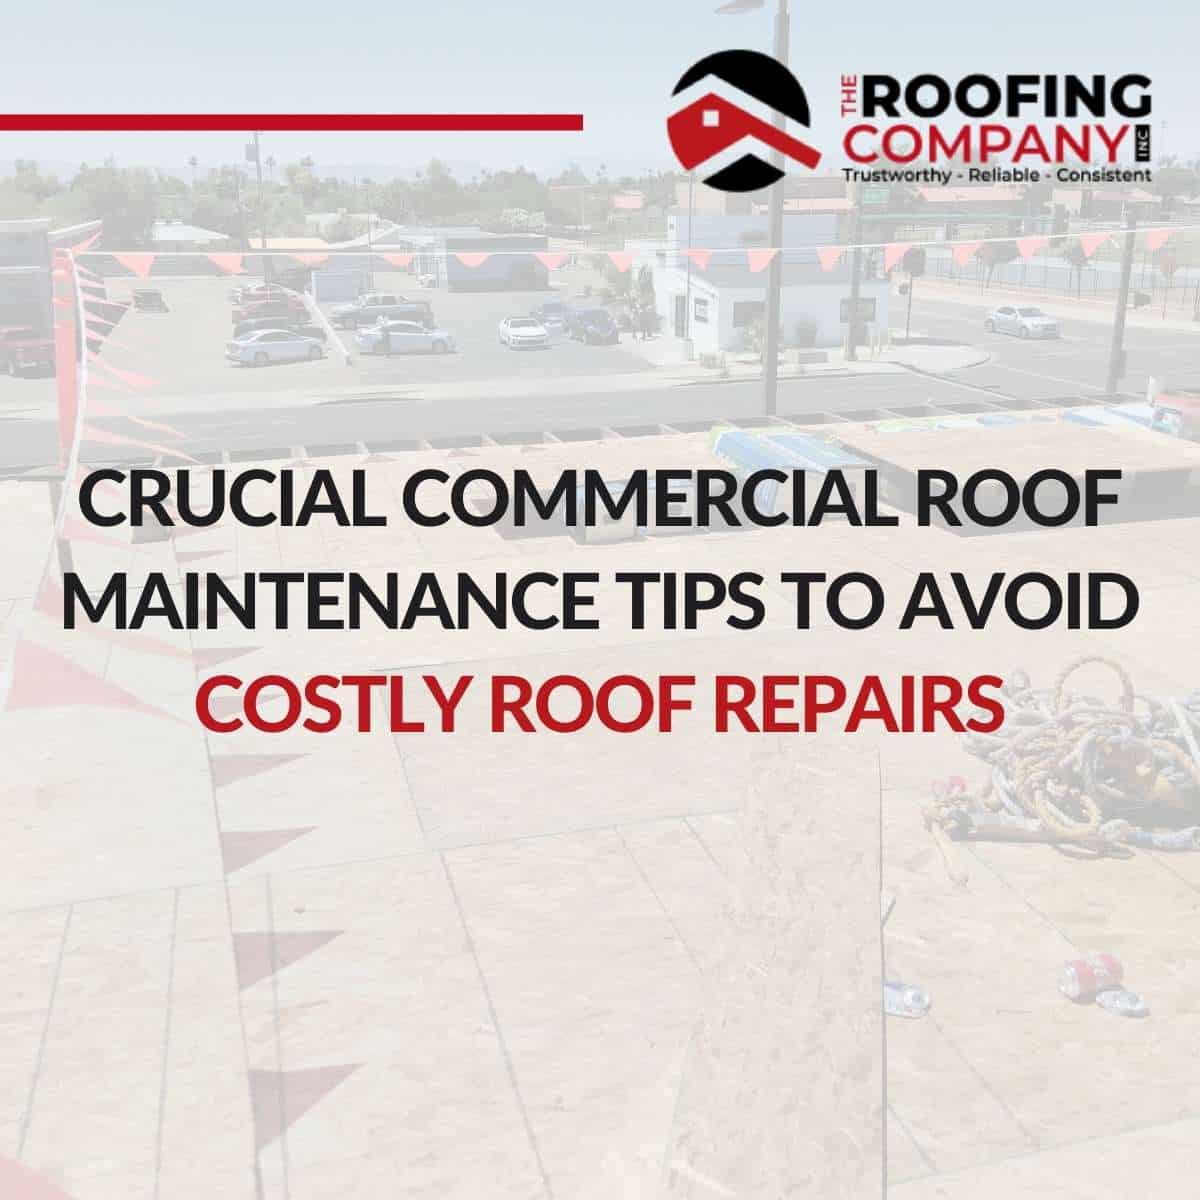 Crucial Commercial Roof Maintenance Tips To Avoid Costly Roof Repairs